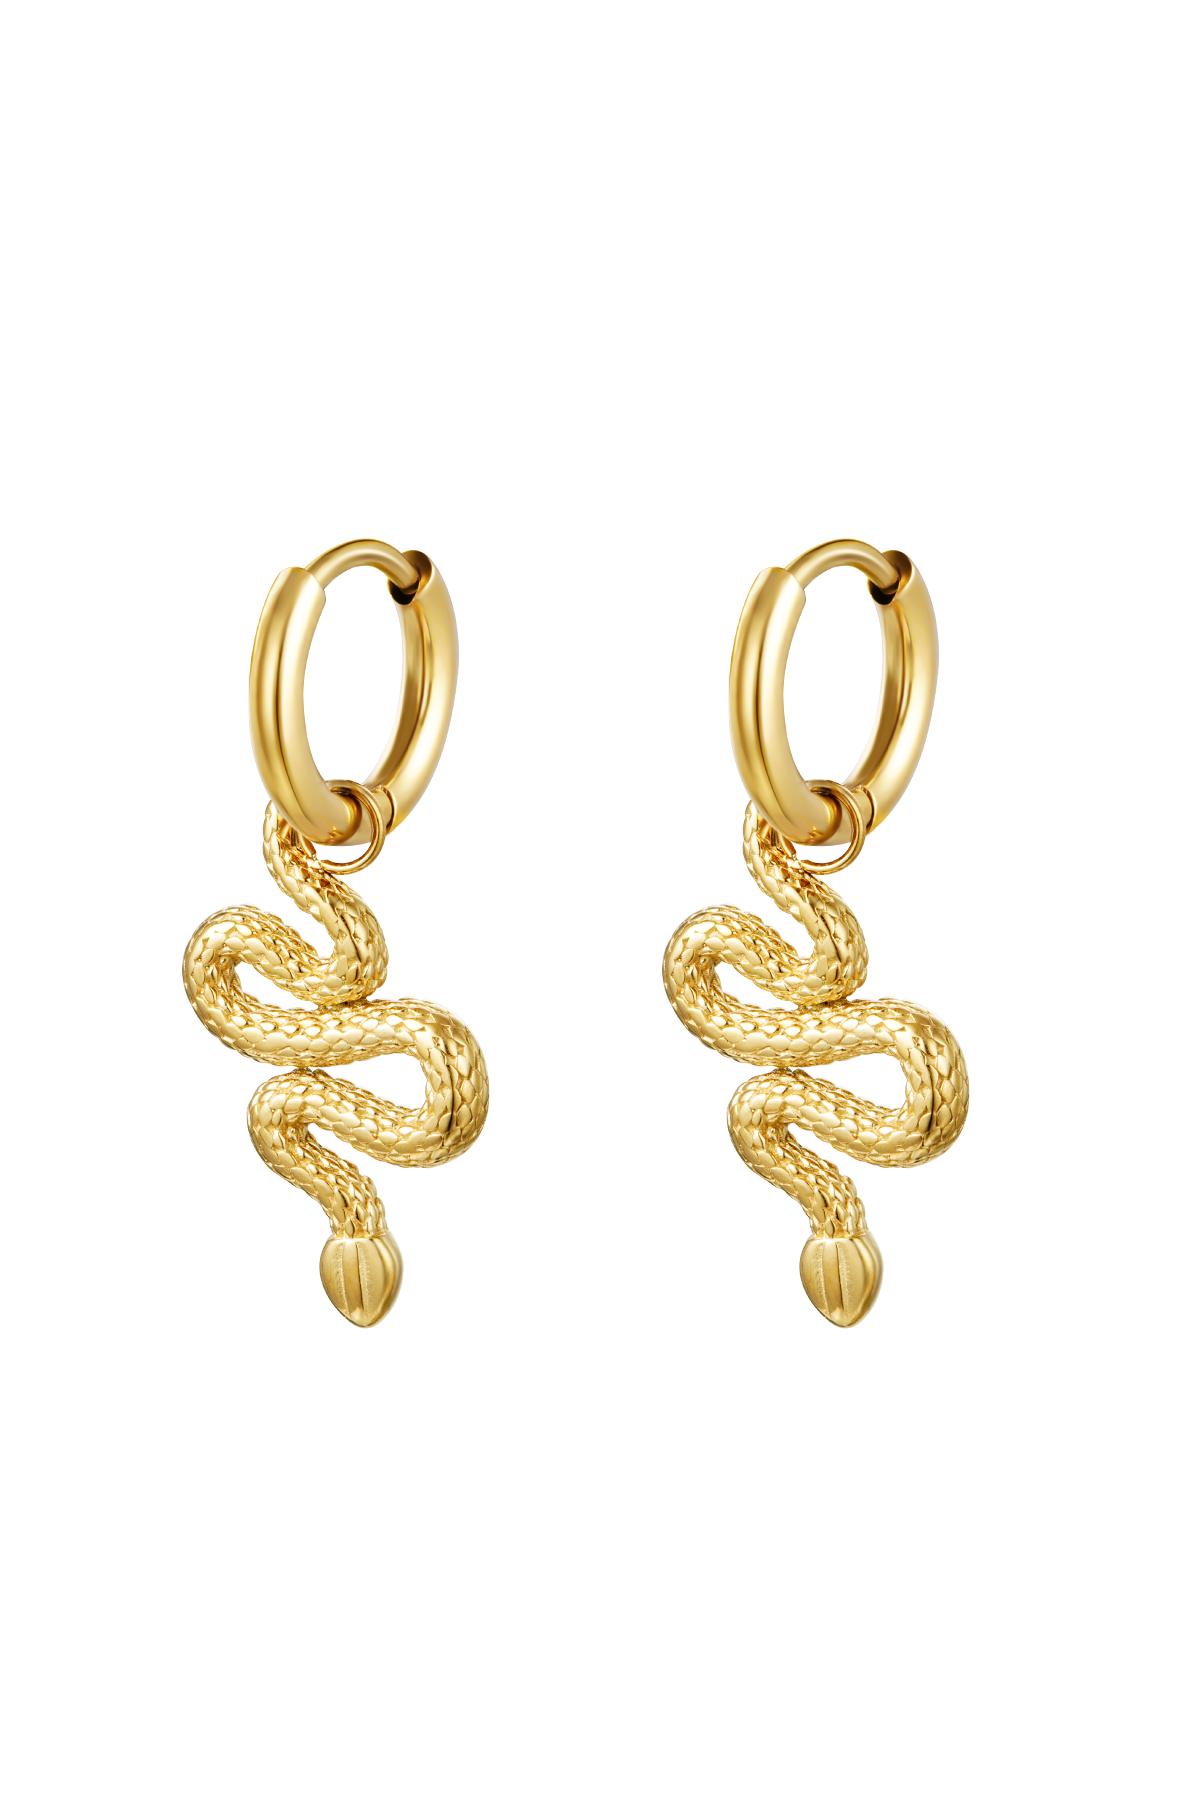 Gold / Earrings Shiny Serpent Gold Stainless Steel 